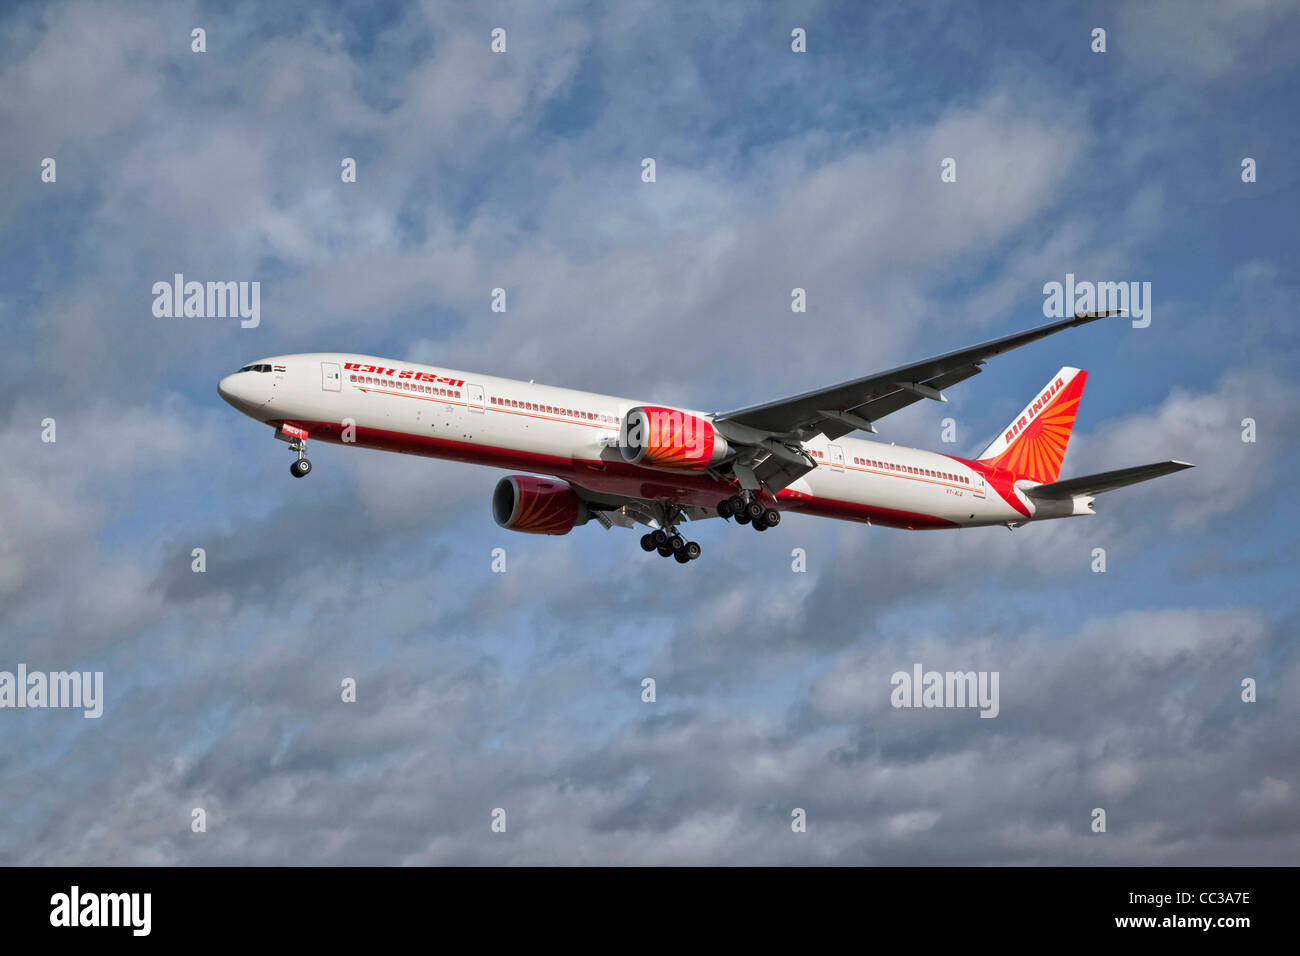 A Boeing B777 of Air India the Indian airline on final approach Stock Photo